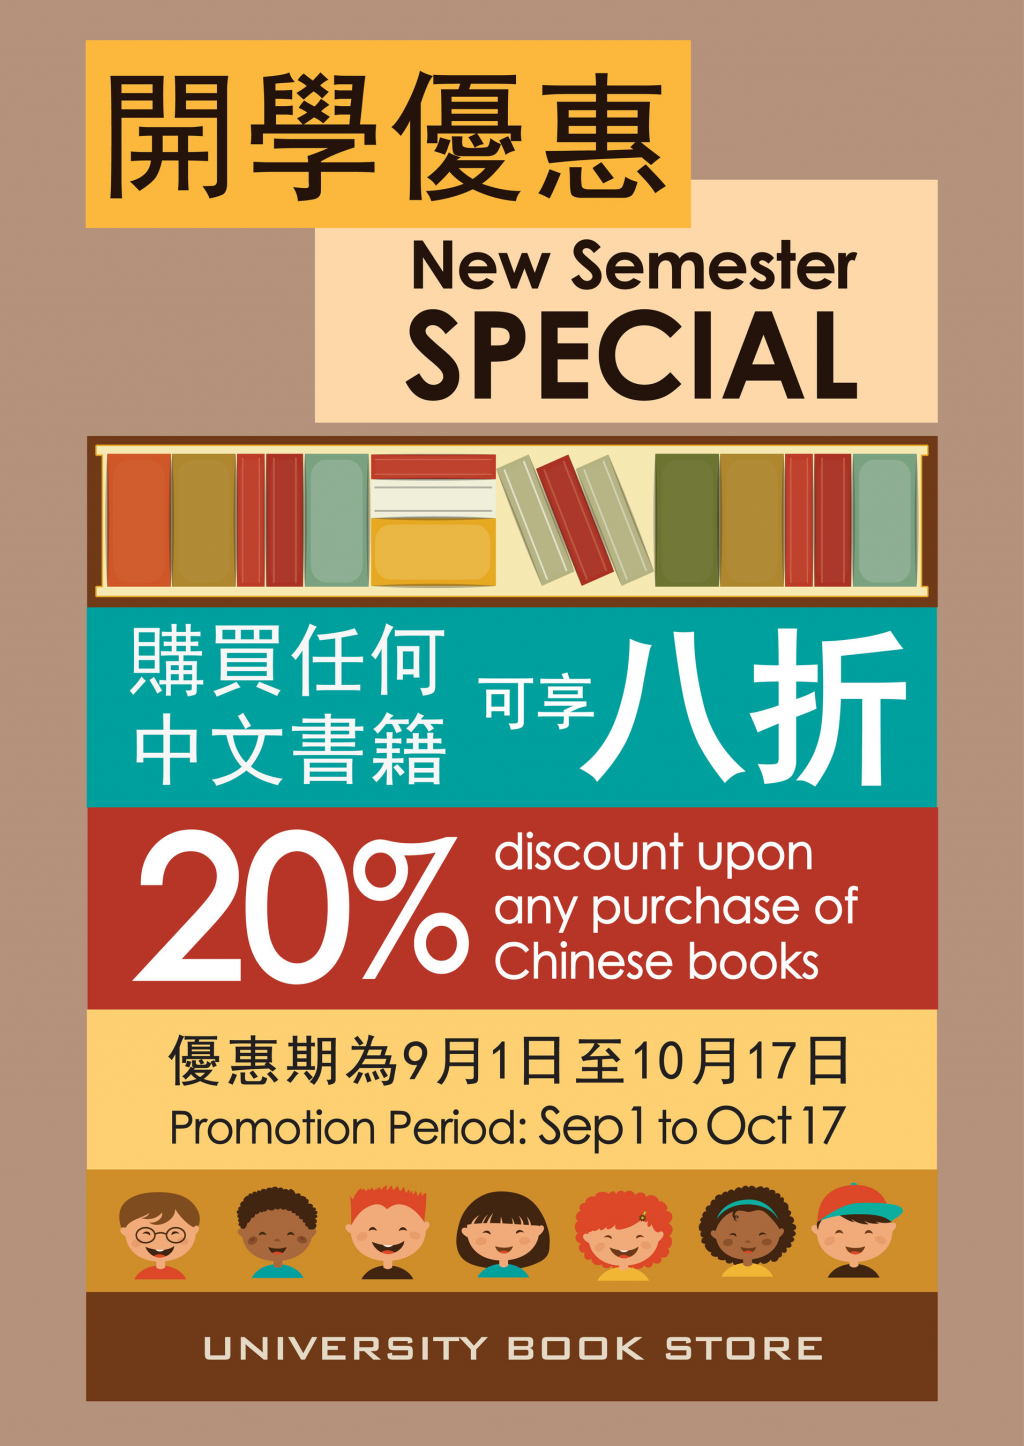 New Semester Special @University Book Store